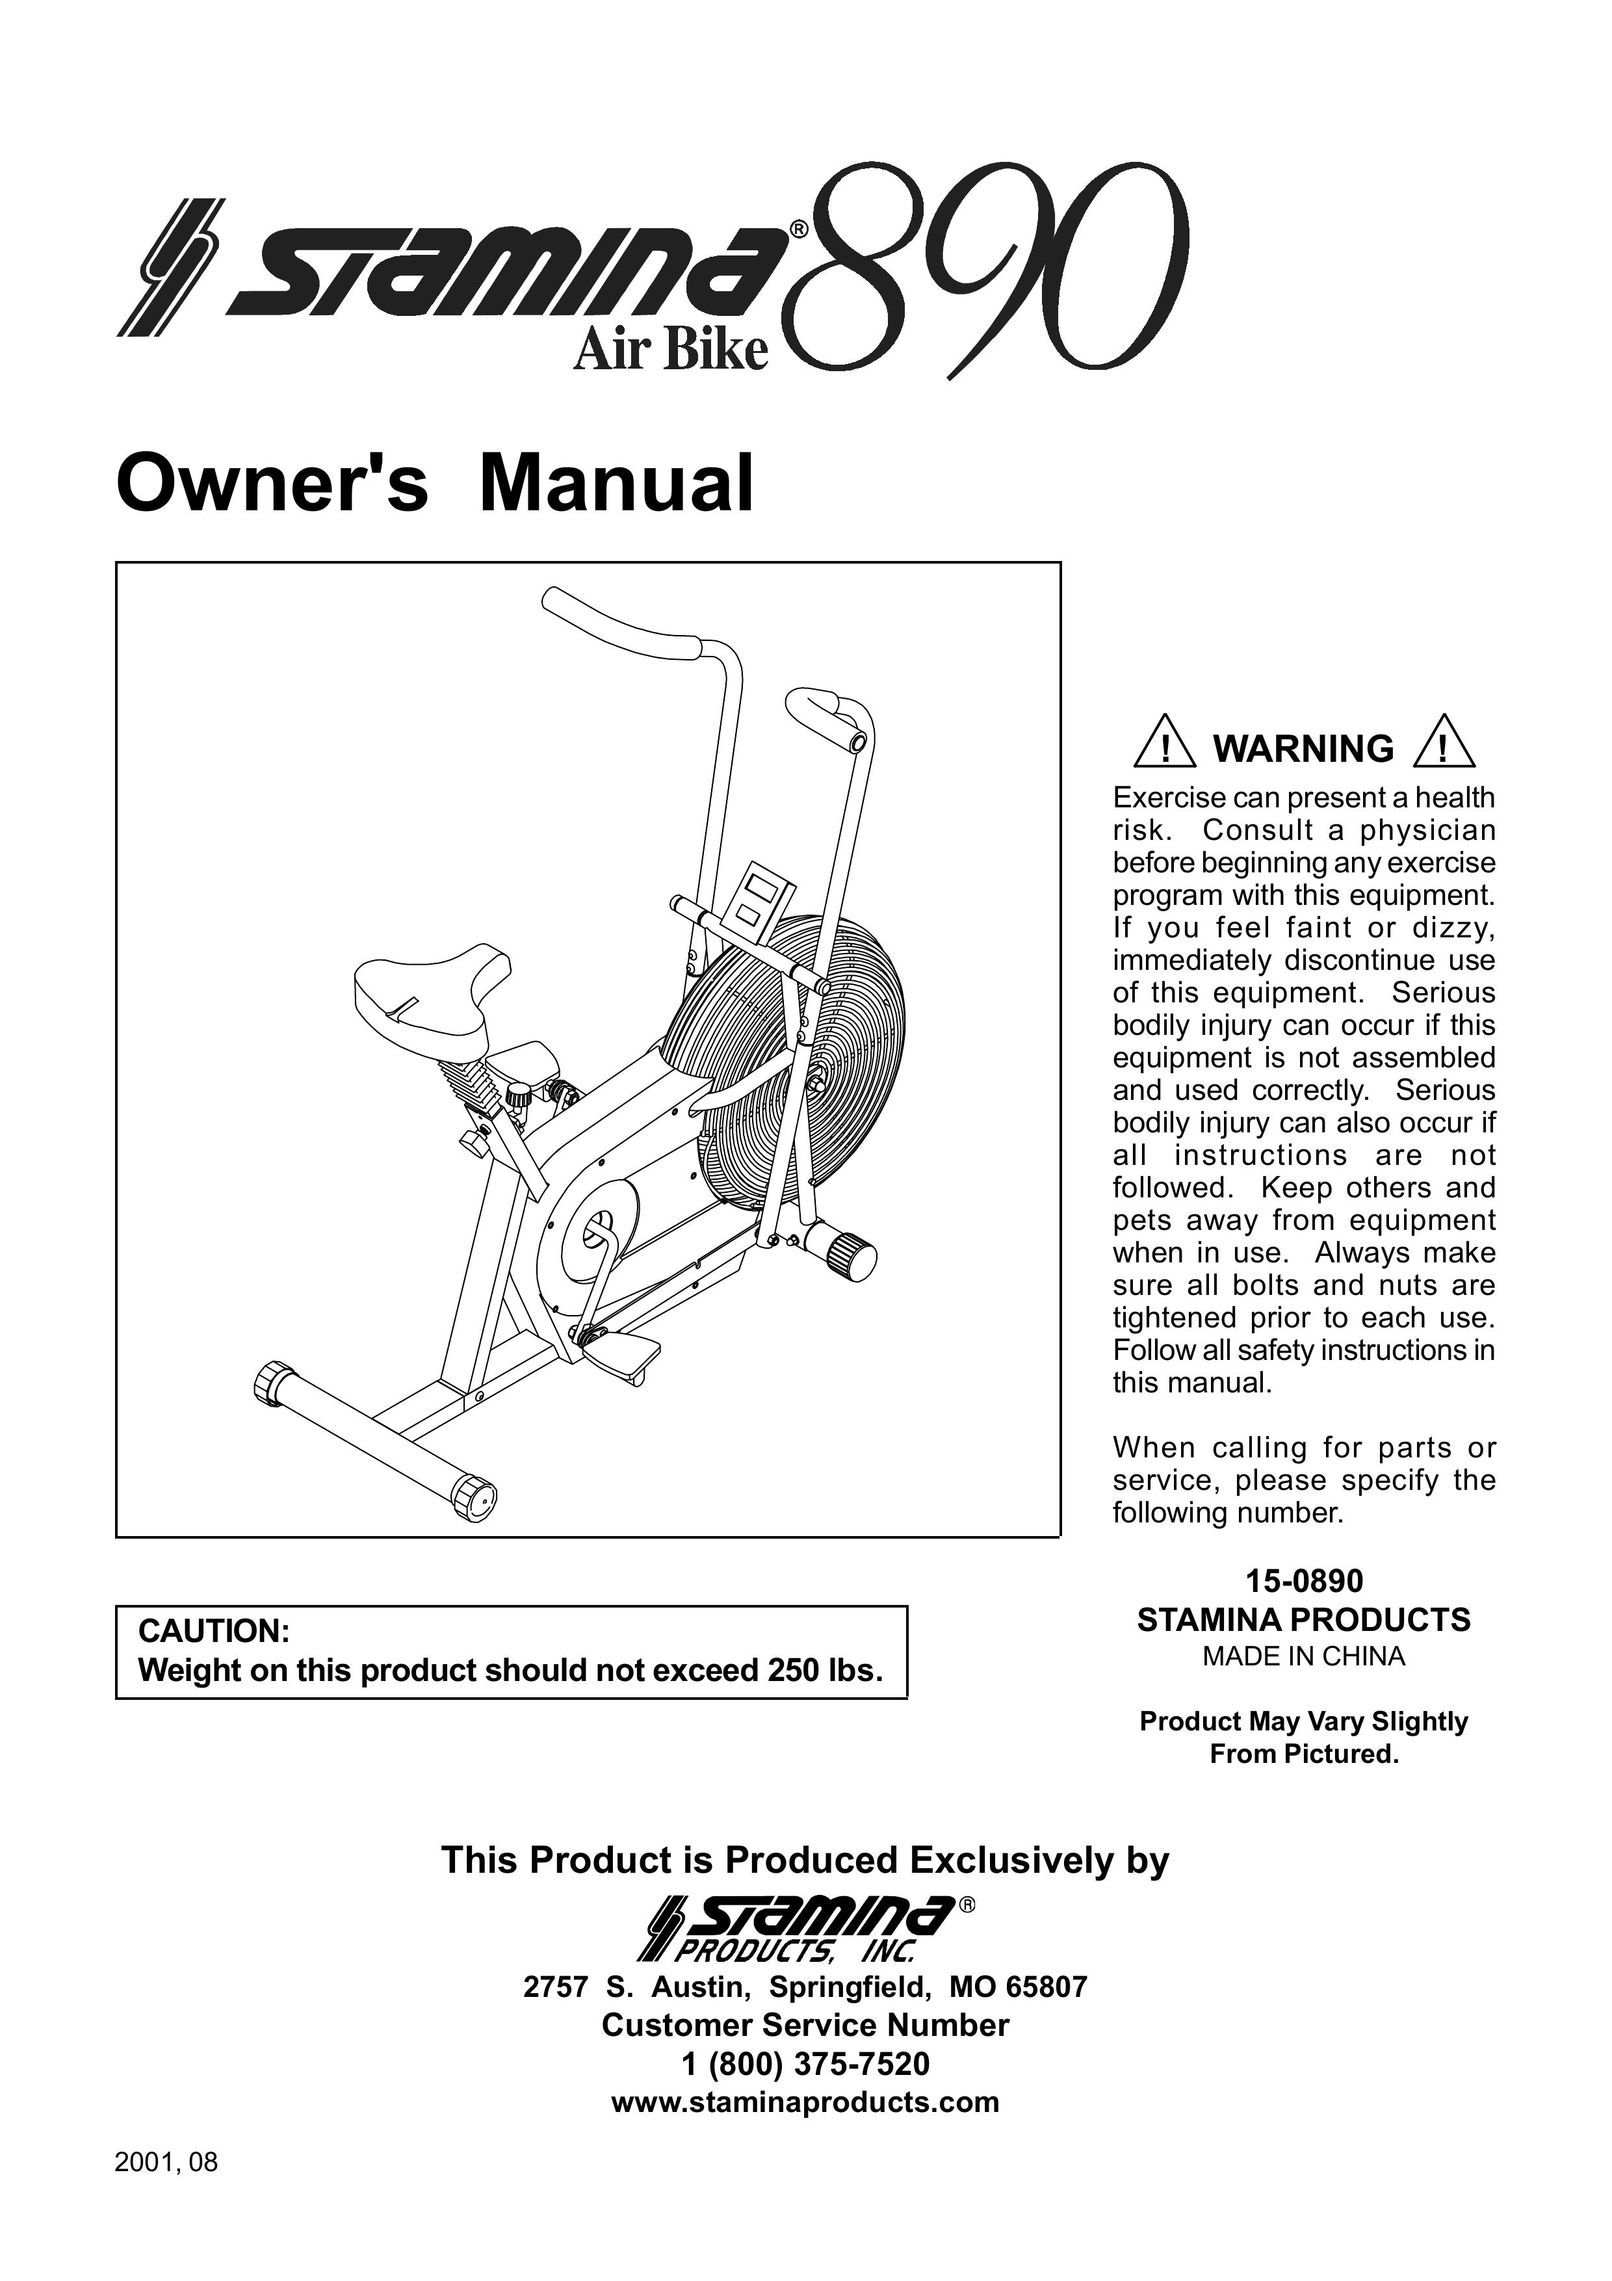 Stamina Products 890 Baby Gym User Manual